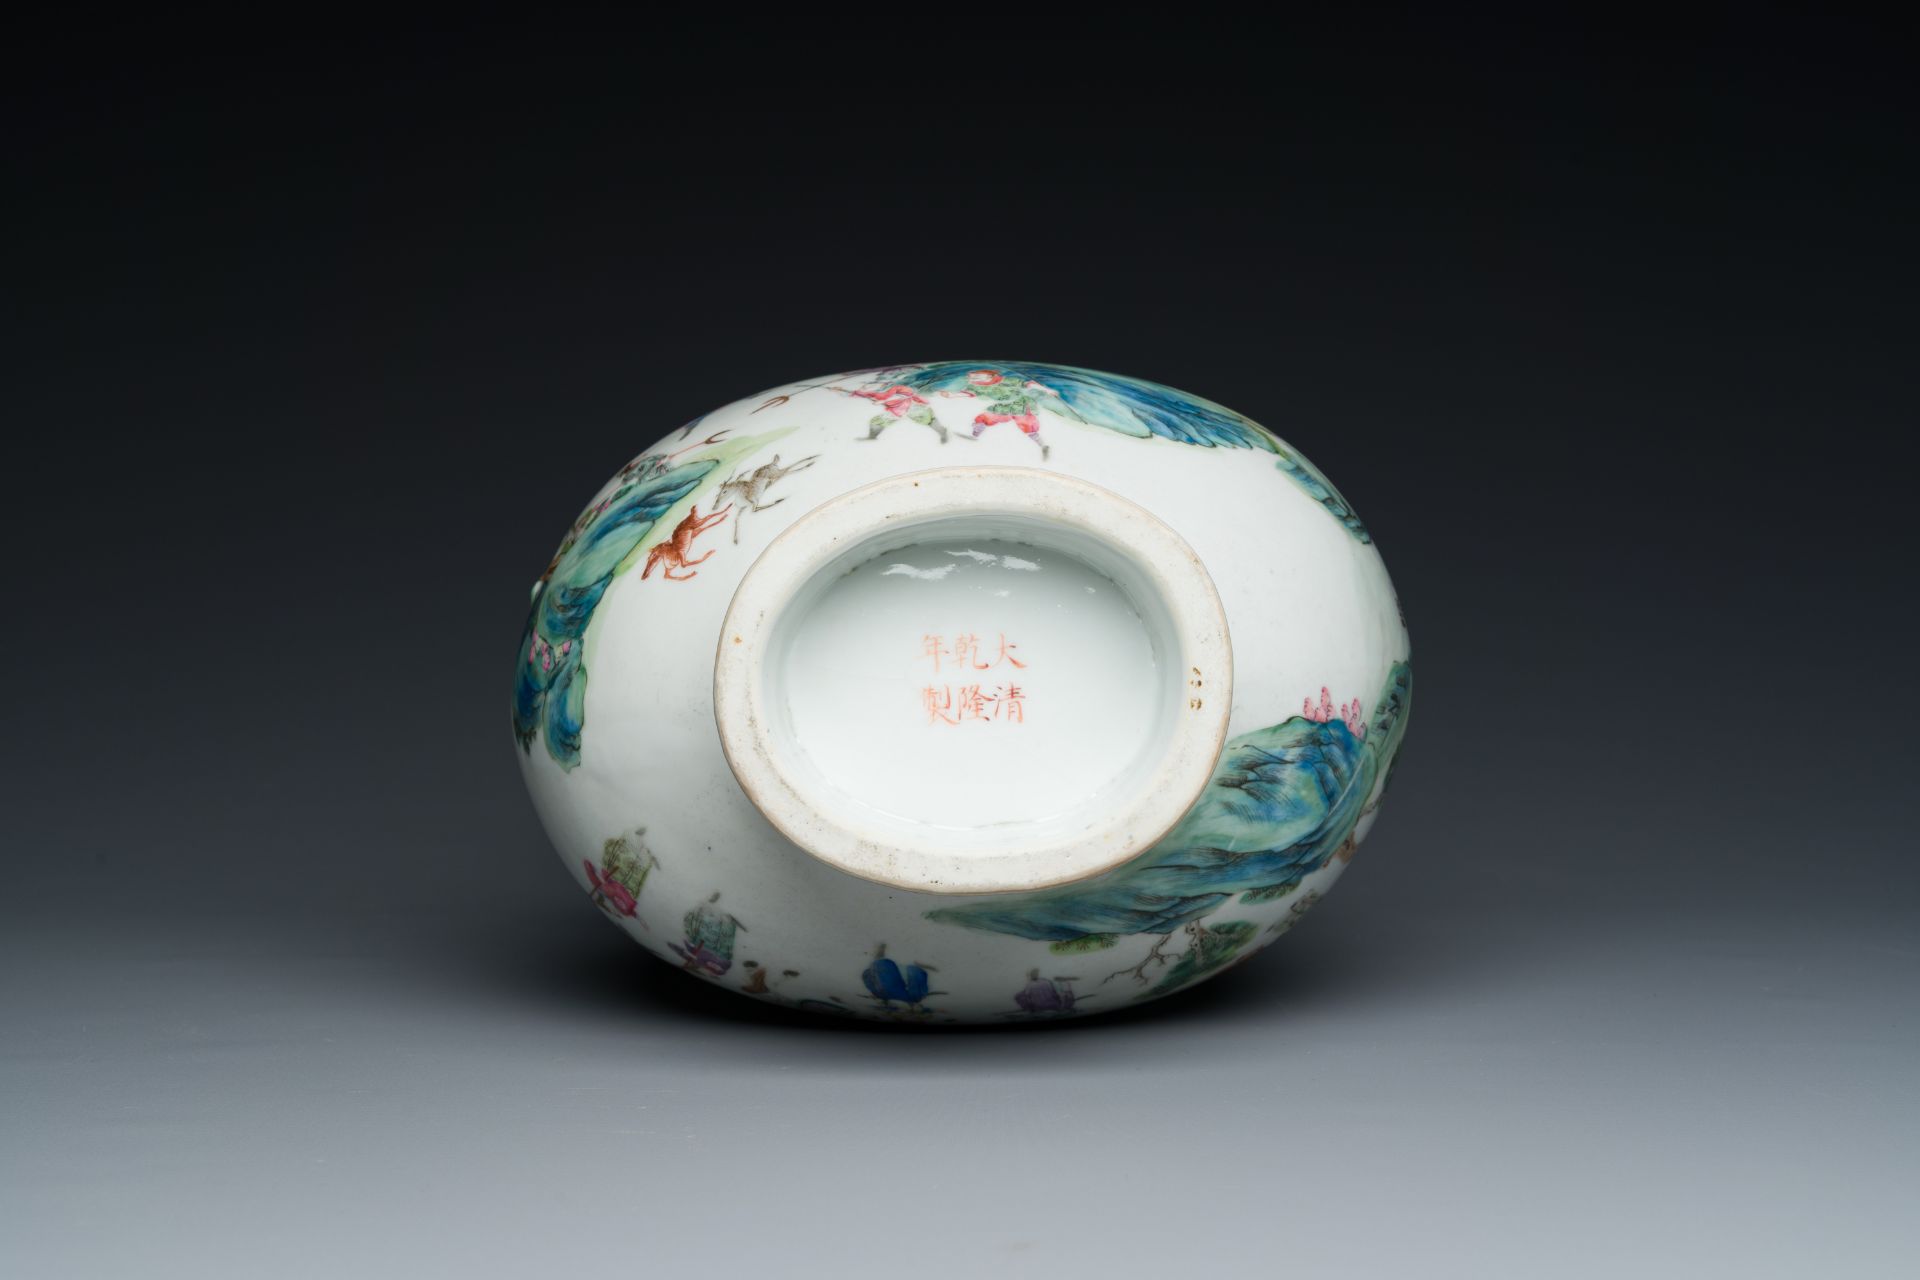 A fine Chinese famille rose 'hu' vase with ruyi handles, 19th C. - Image 6 of 6